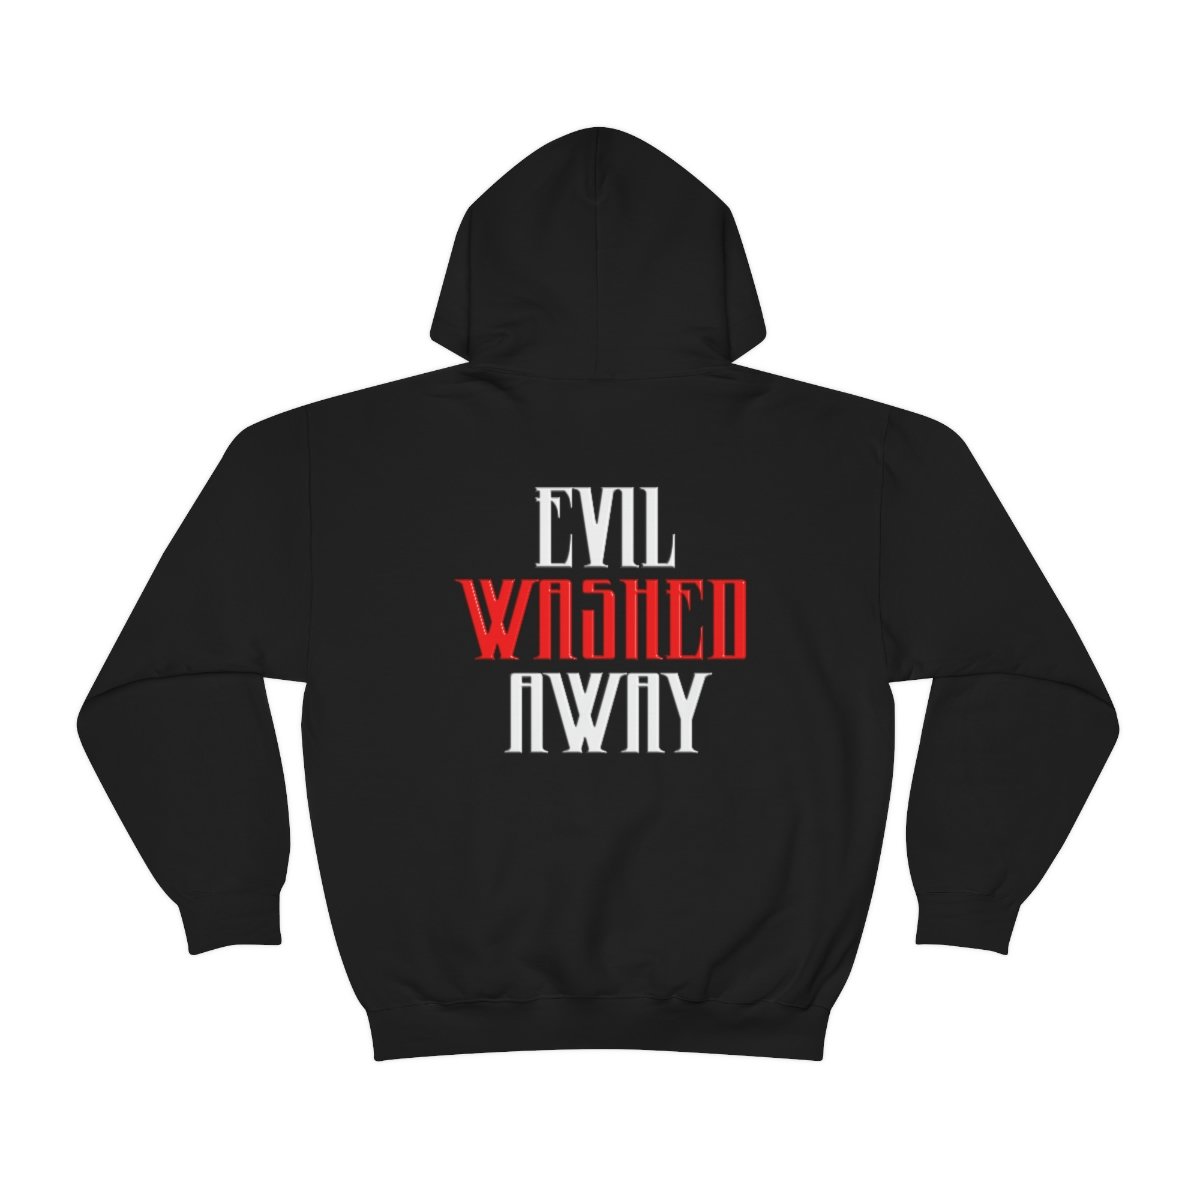 Brotality Evil Washed Away Pullover Hooded Sweatshirt